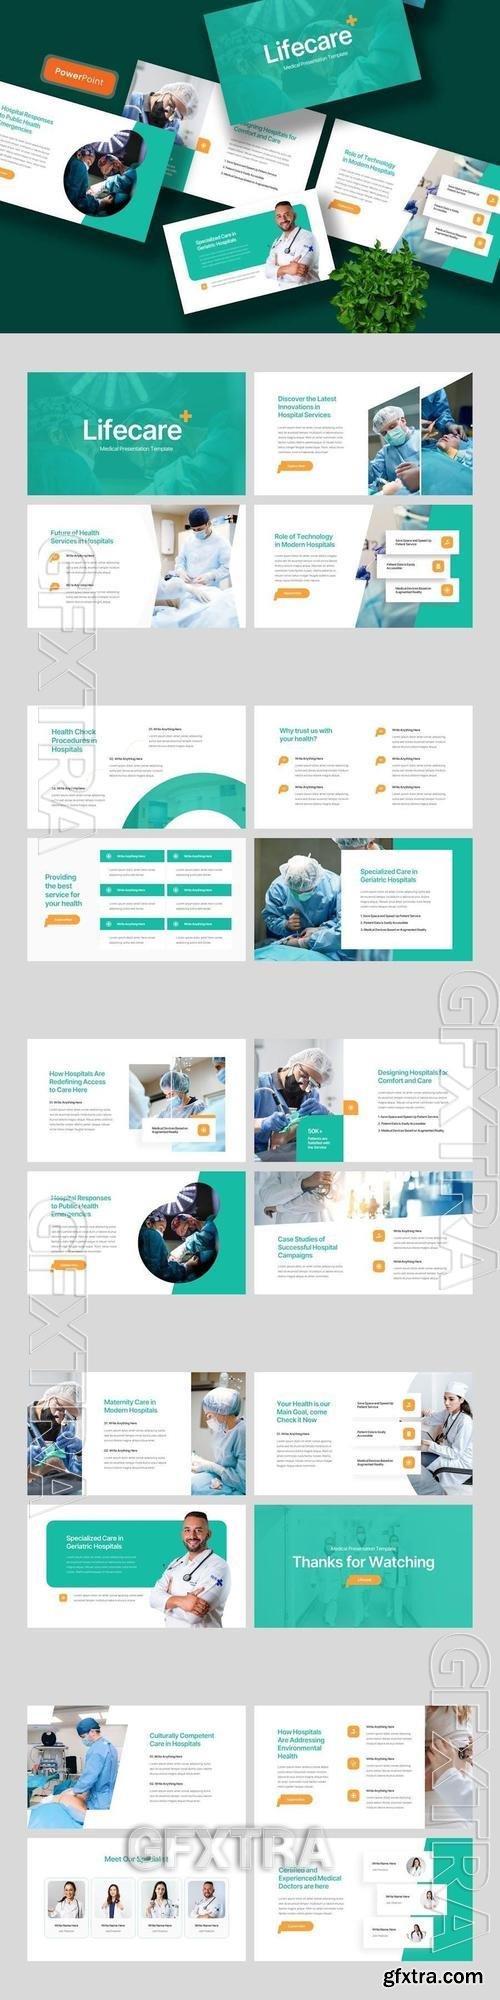 Lifecare - Medical PowerPoint EHKTY4P